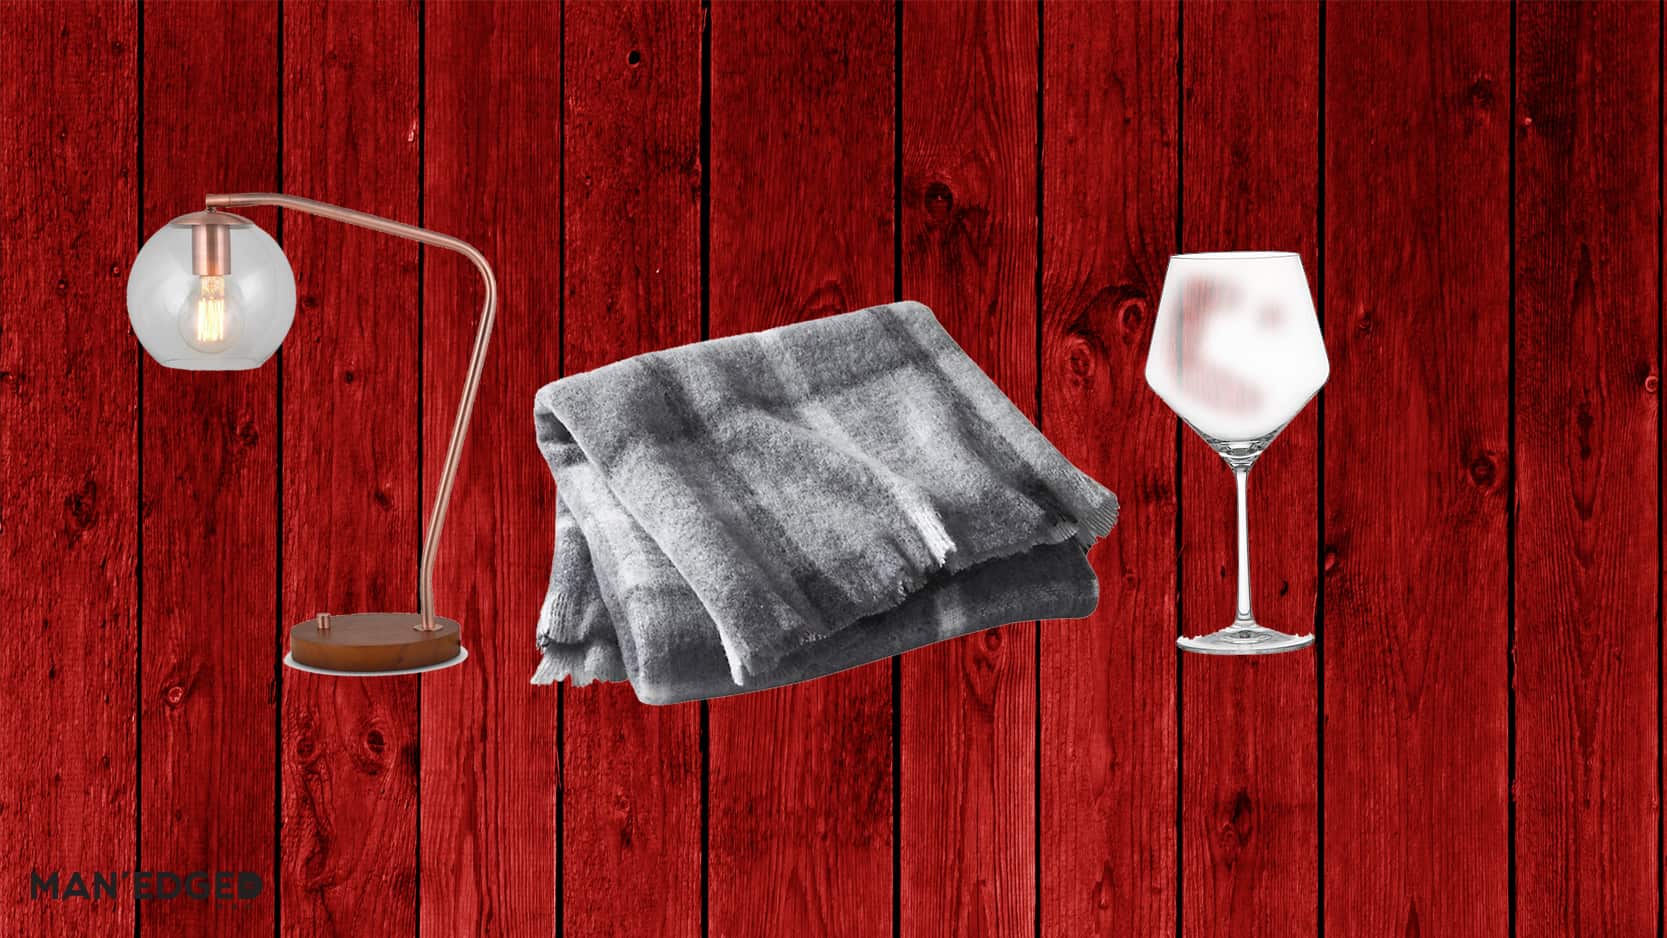 6 Masculine Chic Gift Ideas for the Guy into Home Decor